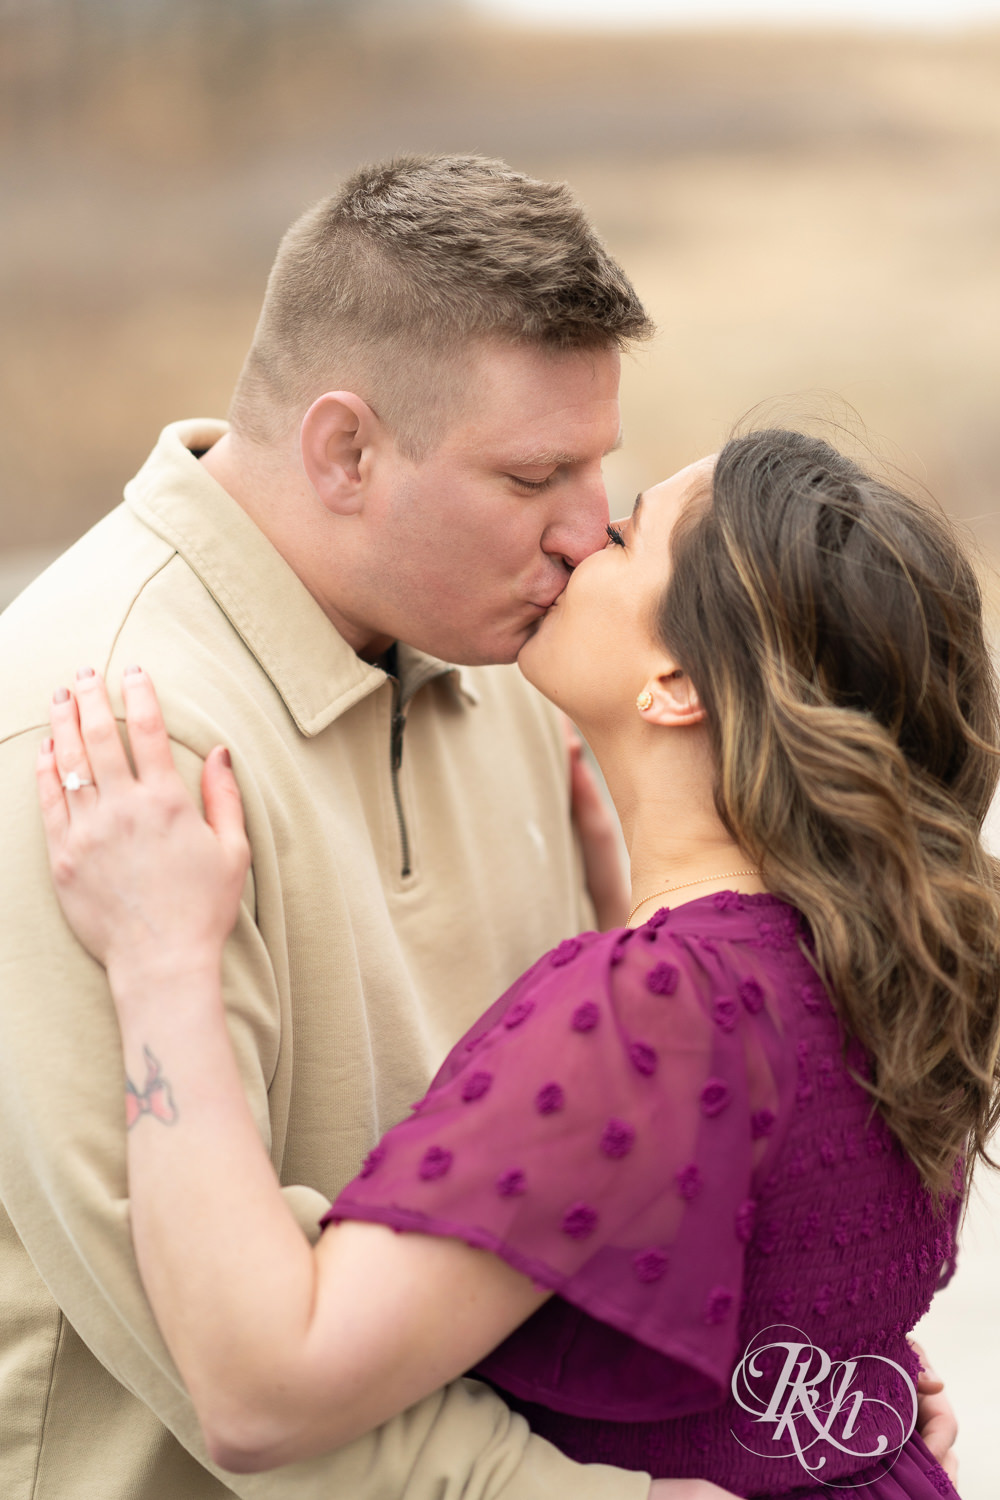 Man in jeans and woman in magenta dress kiss during March engagement photography in Eagan, Minnesota.